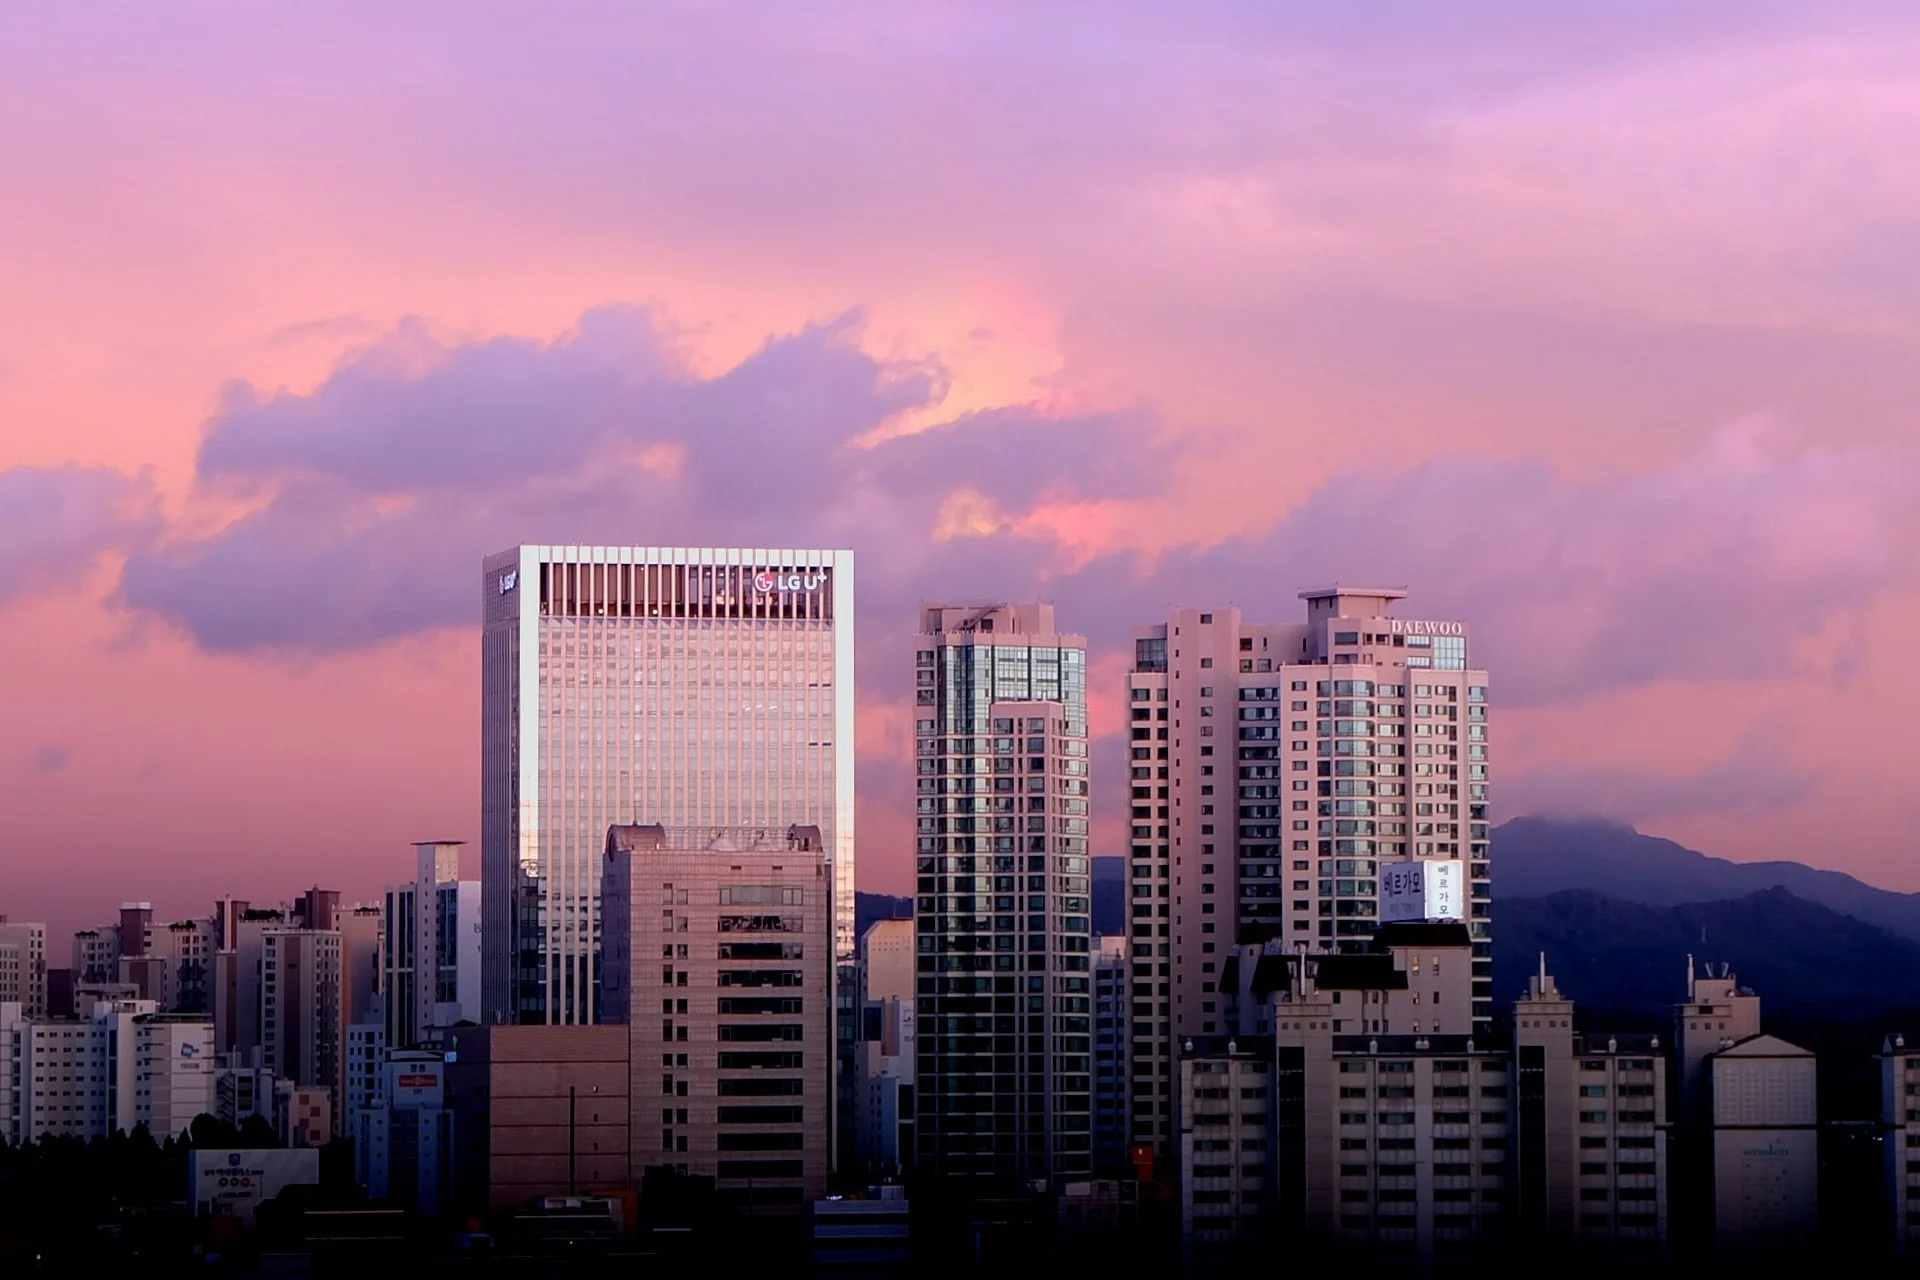 A city with tall buildings and a purple sky.